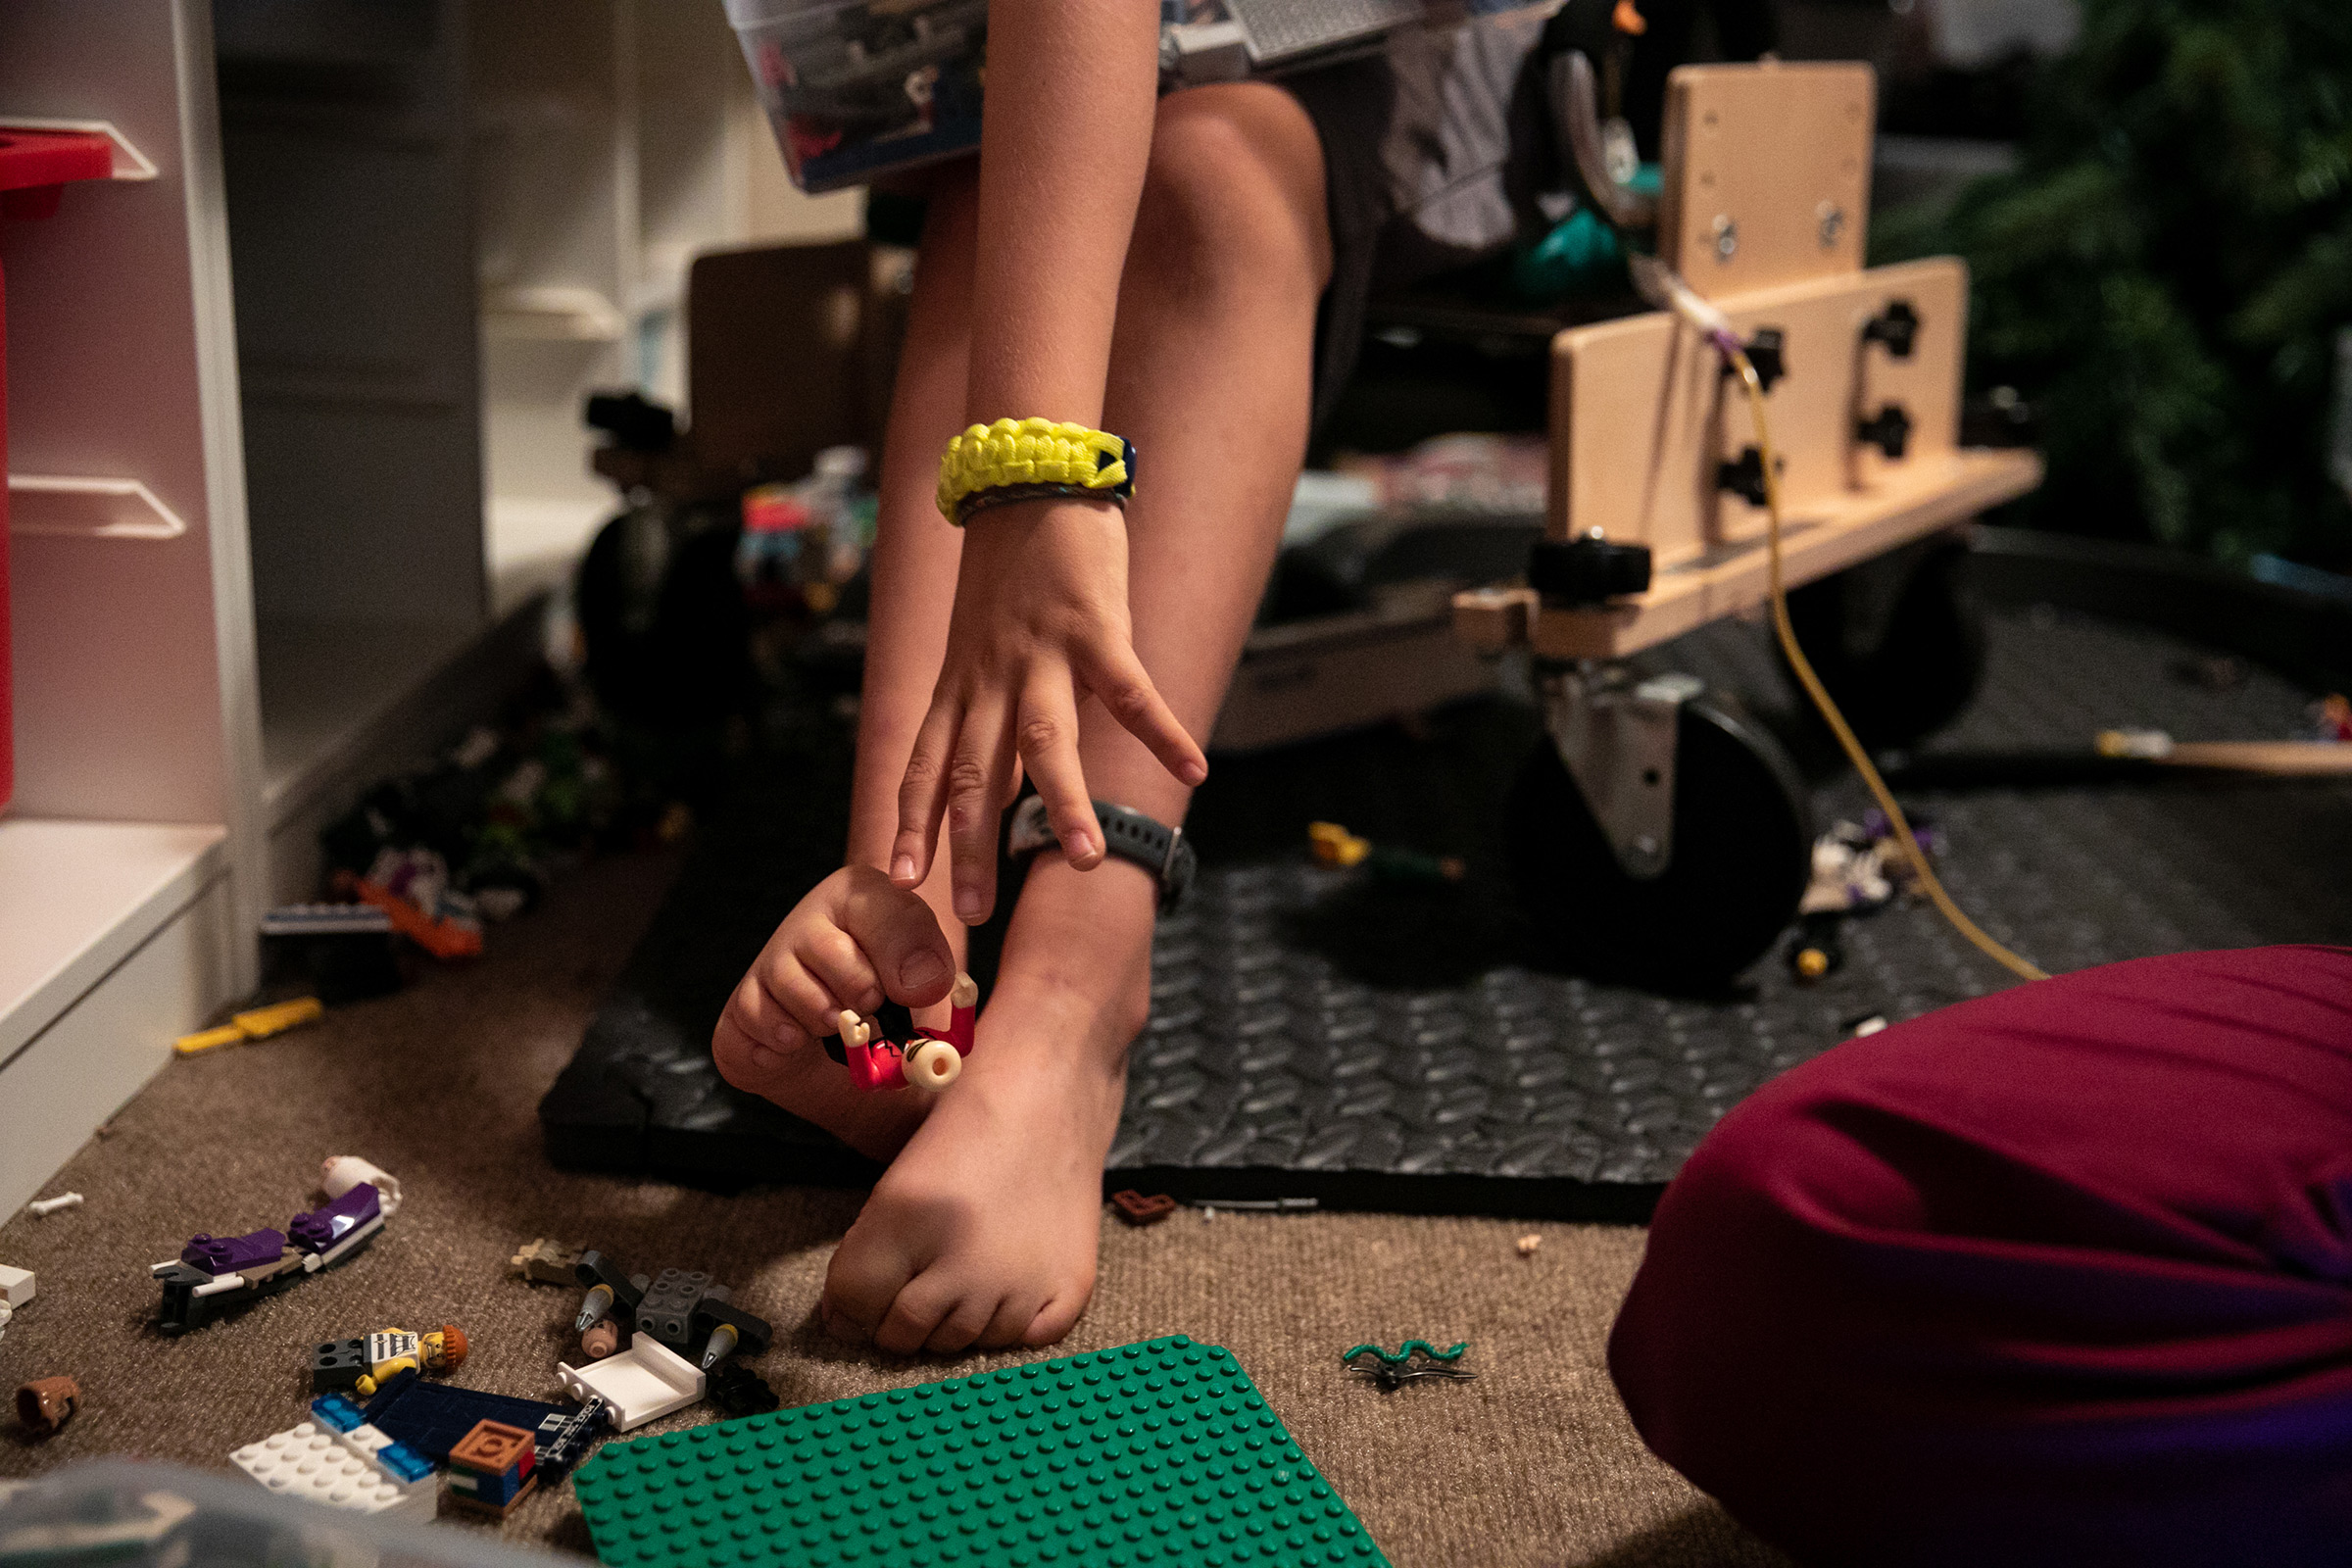 Braden uses his toes to reach for a LEGO on a break inbetween physical therapy treatments.